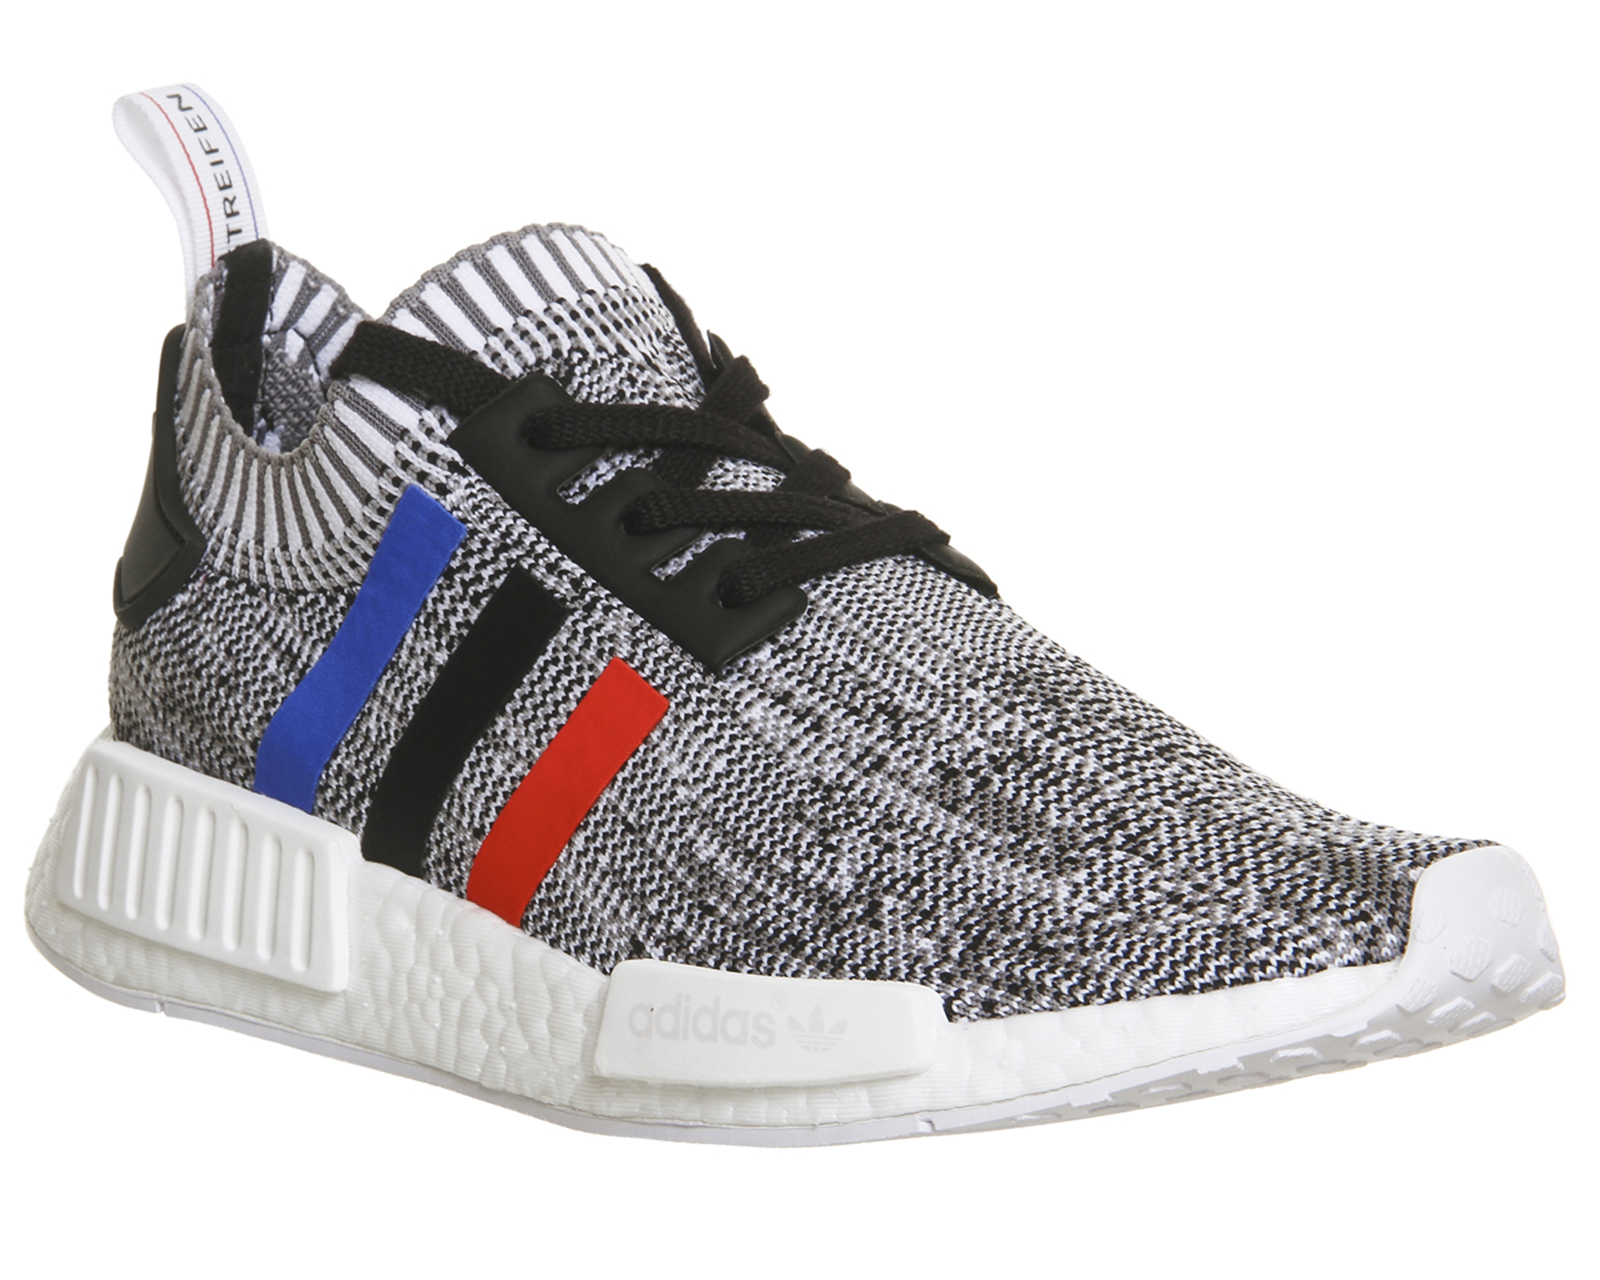 adidas Nmd R1 Prime Knit White Core Red Core Black - His trainers